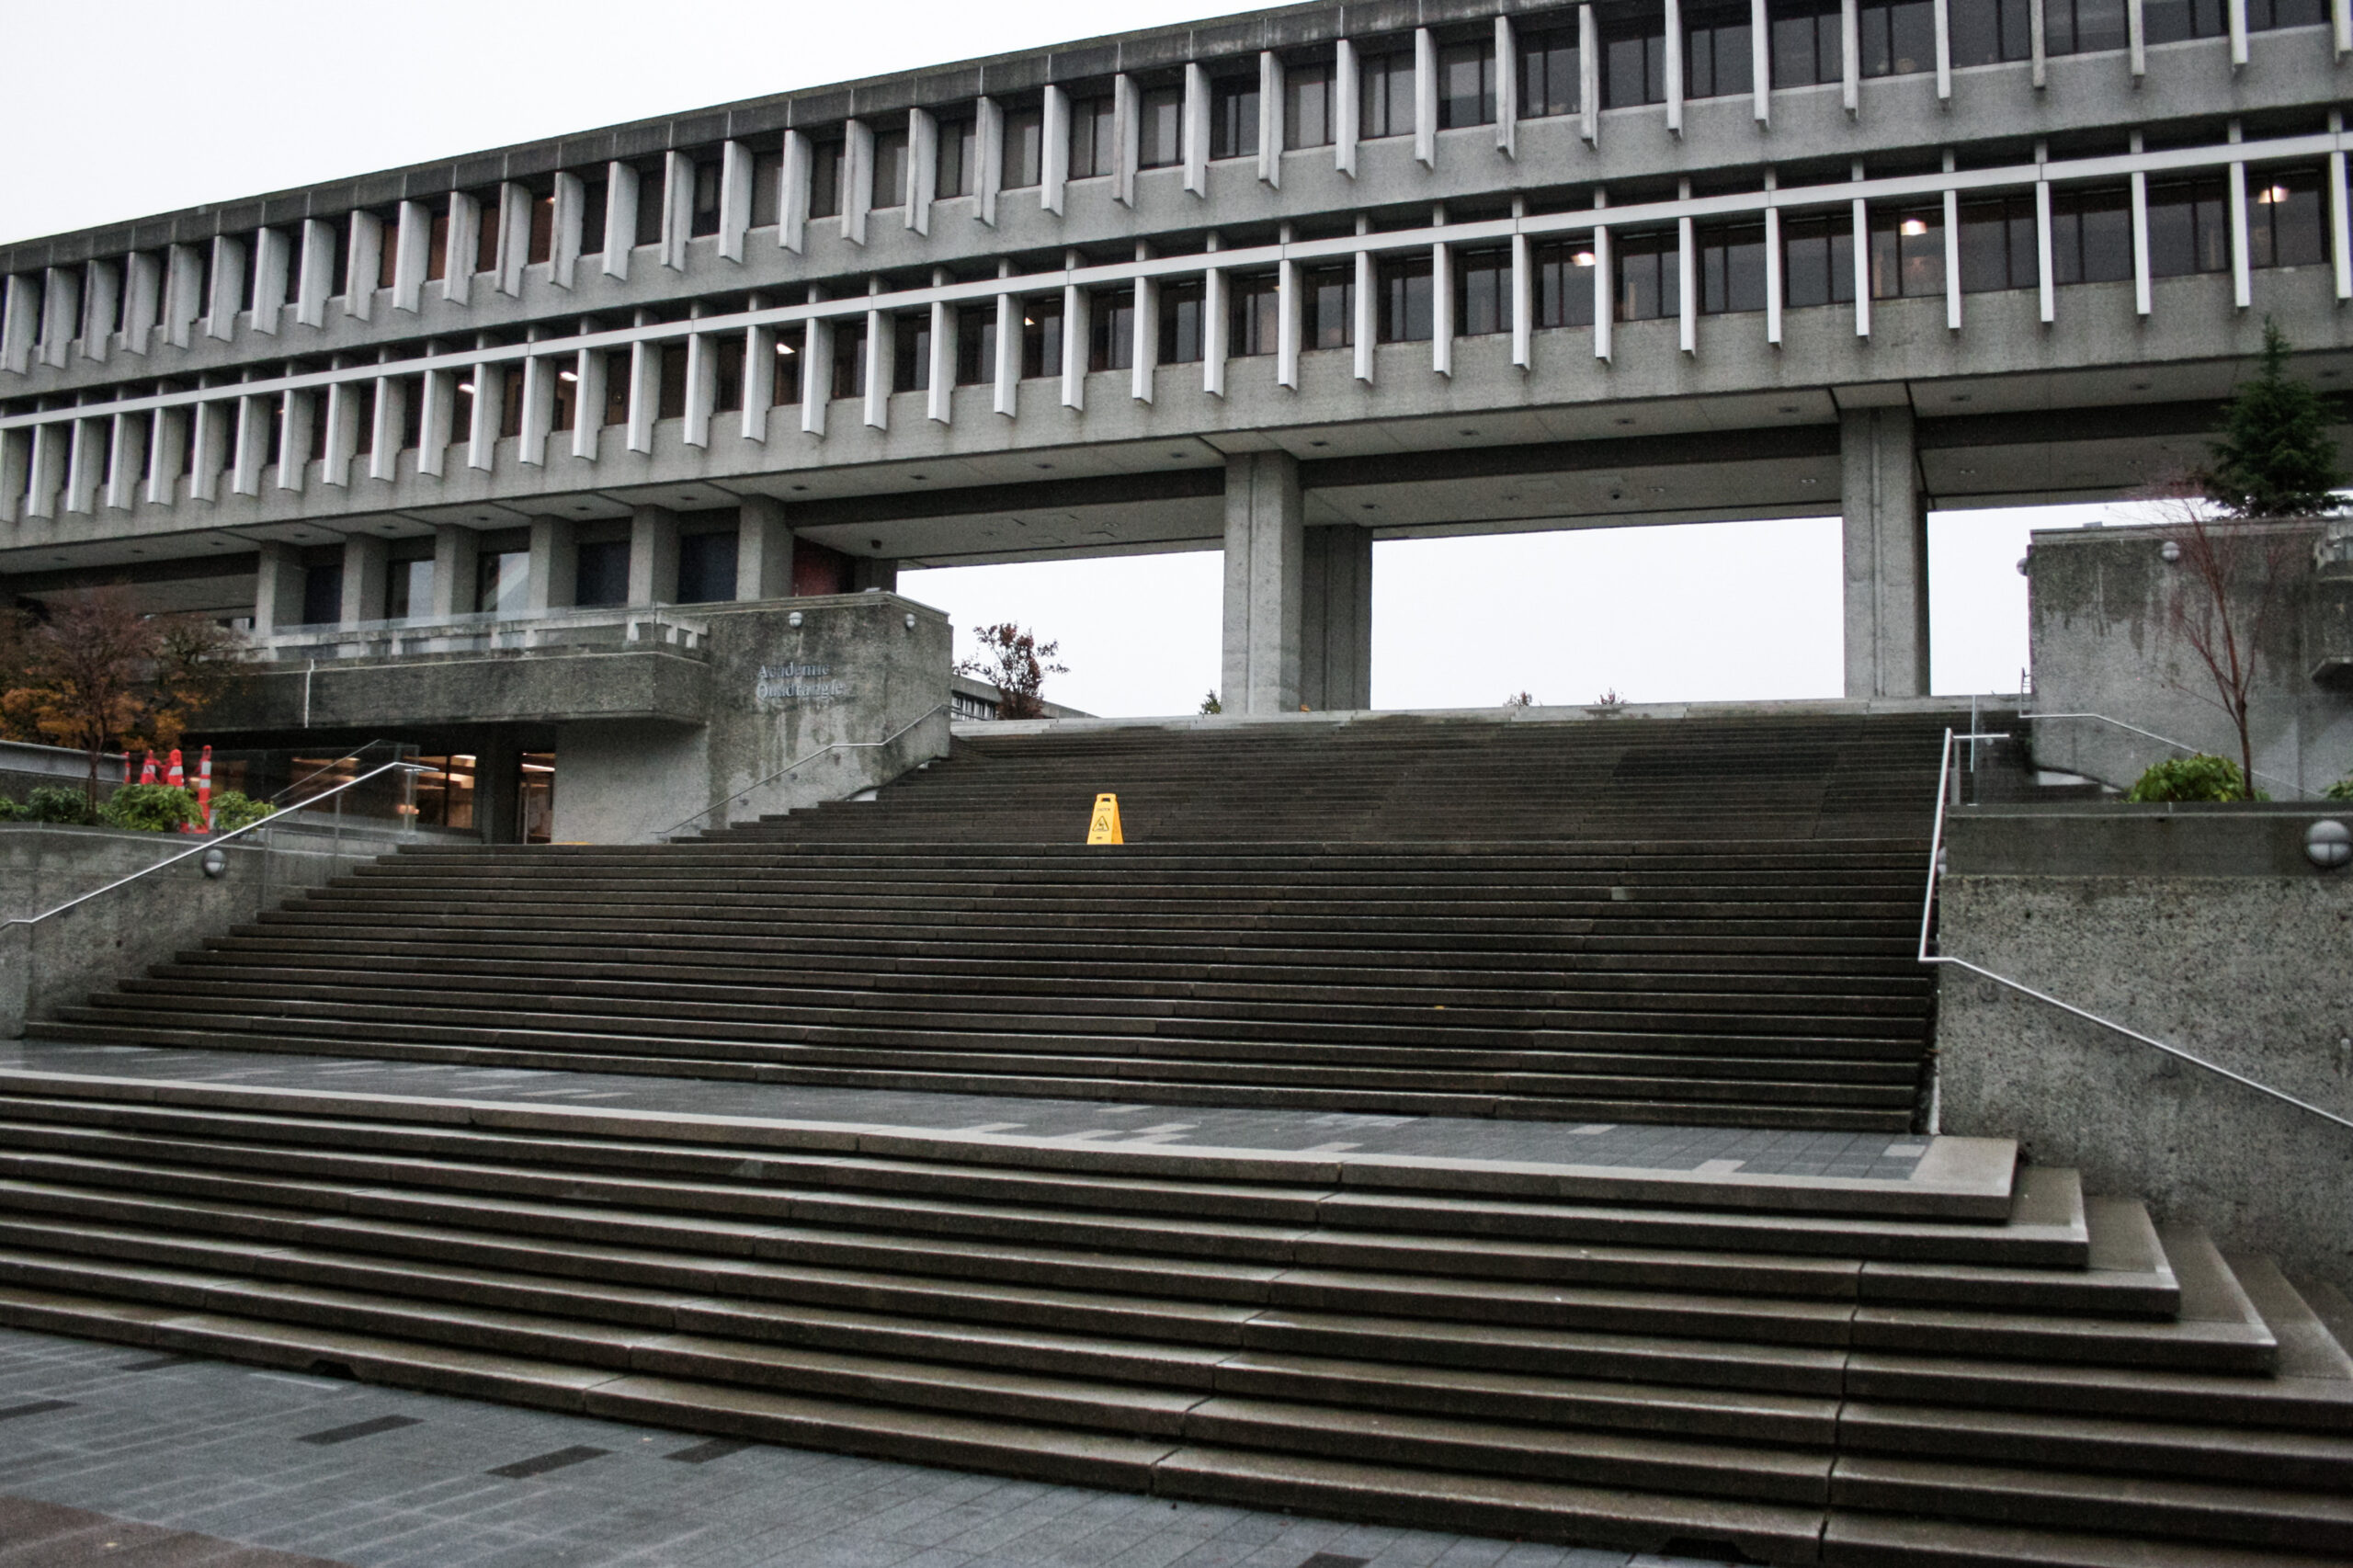 This is a photo of the SFU Burnaby campus. The outdoor staircase into the convocation mall is shown. The sky is dark and cloudy.